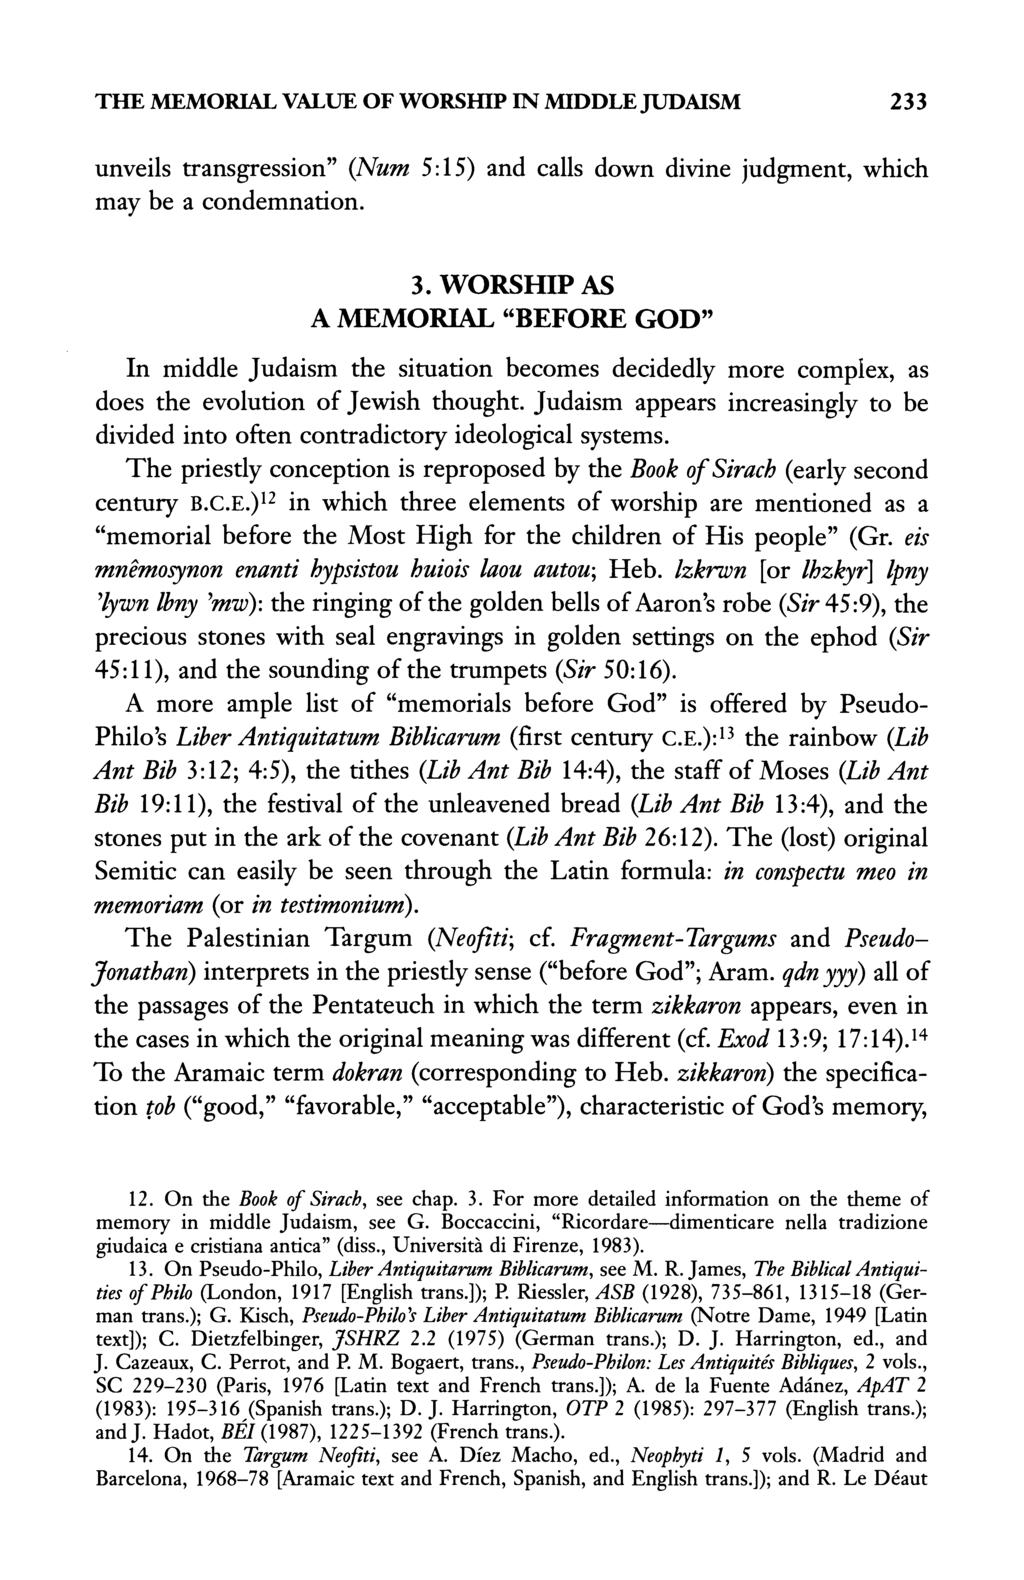 THE MEMORIAL VALUE OF WORSHIP IN MIDDLE JUDAISM 233 unveils transgression" (Num 5:15) and calls down divine judgment, which may be a condemnation. 3.